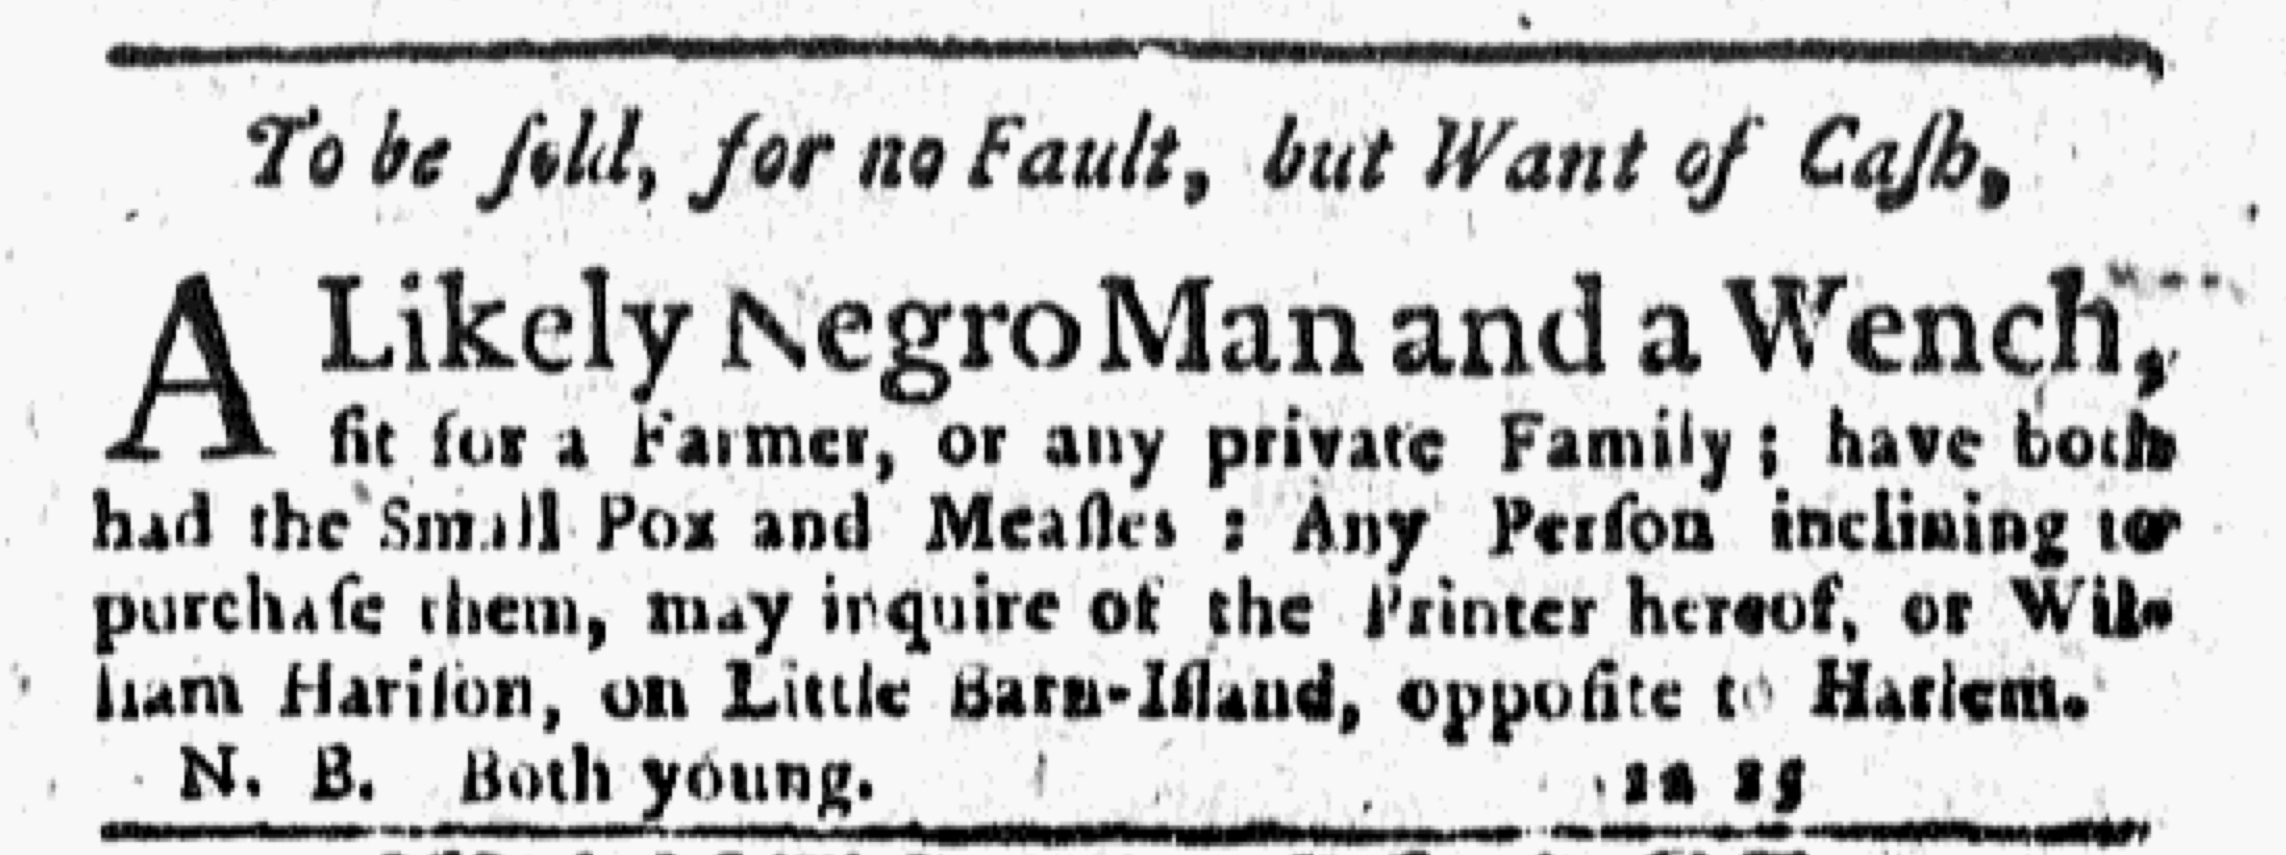 Slavery Advertisements Published February 8 1770 The Adverts 250 Project